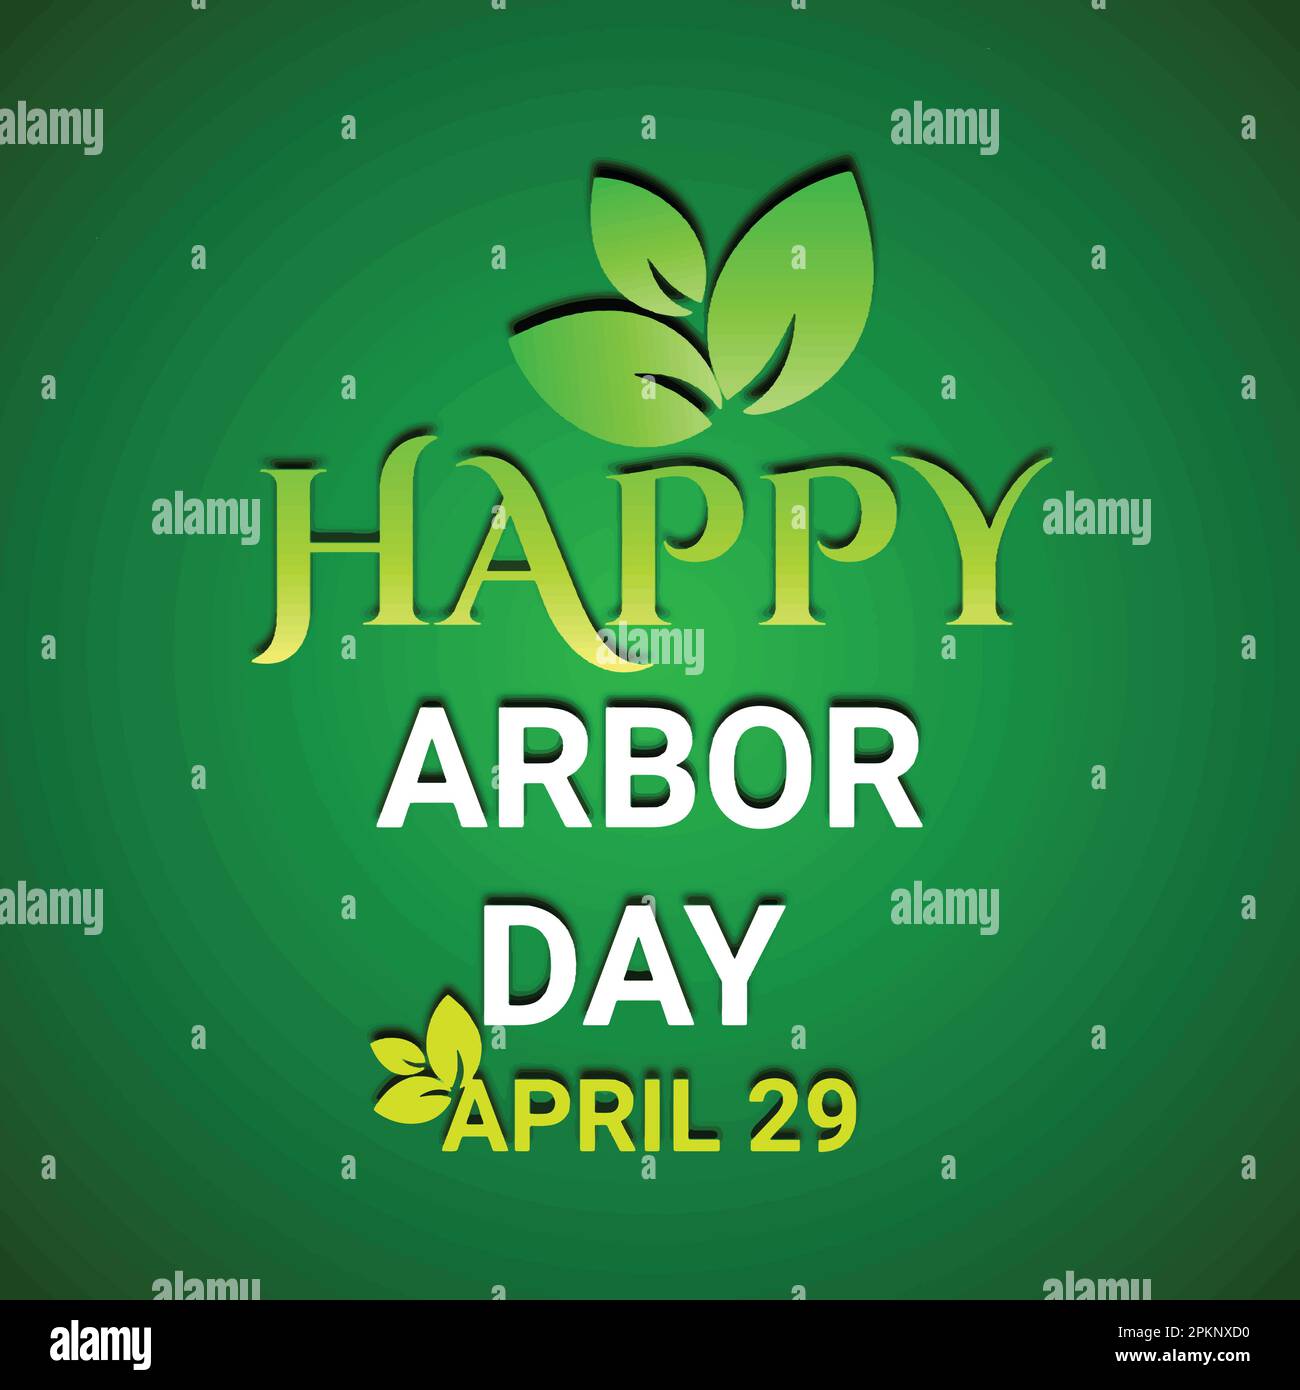 Happy Arbor Day. April 29. Green background with green leaves. Vector